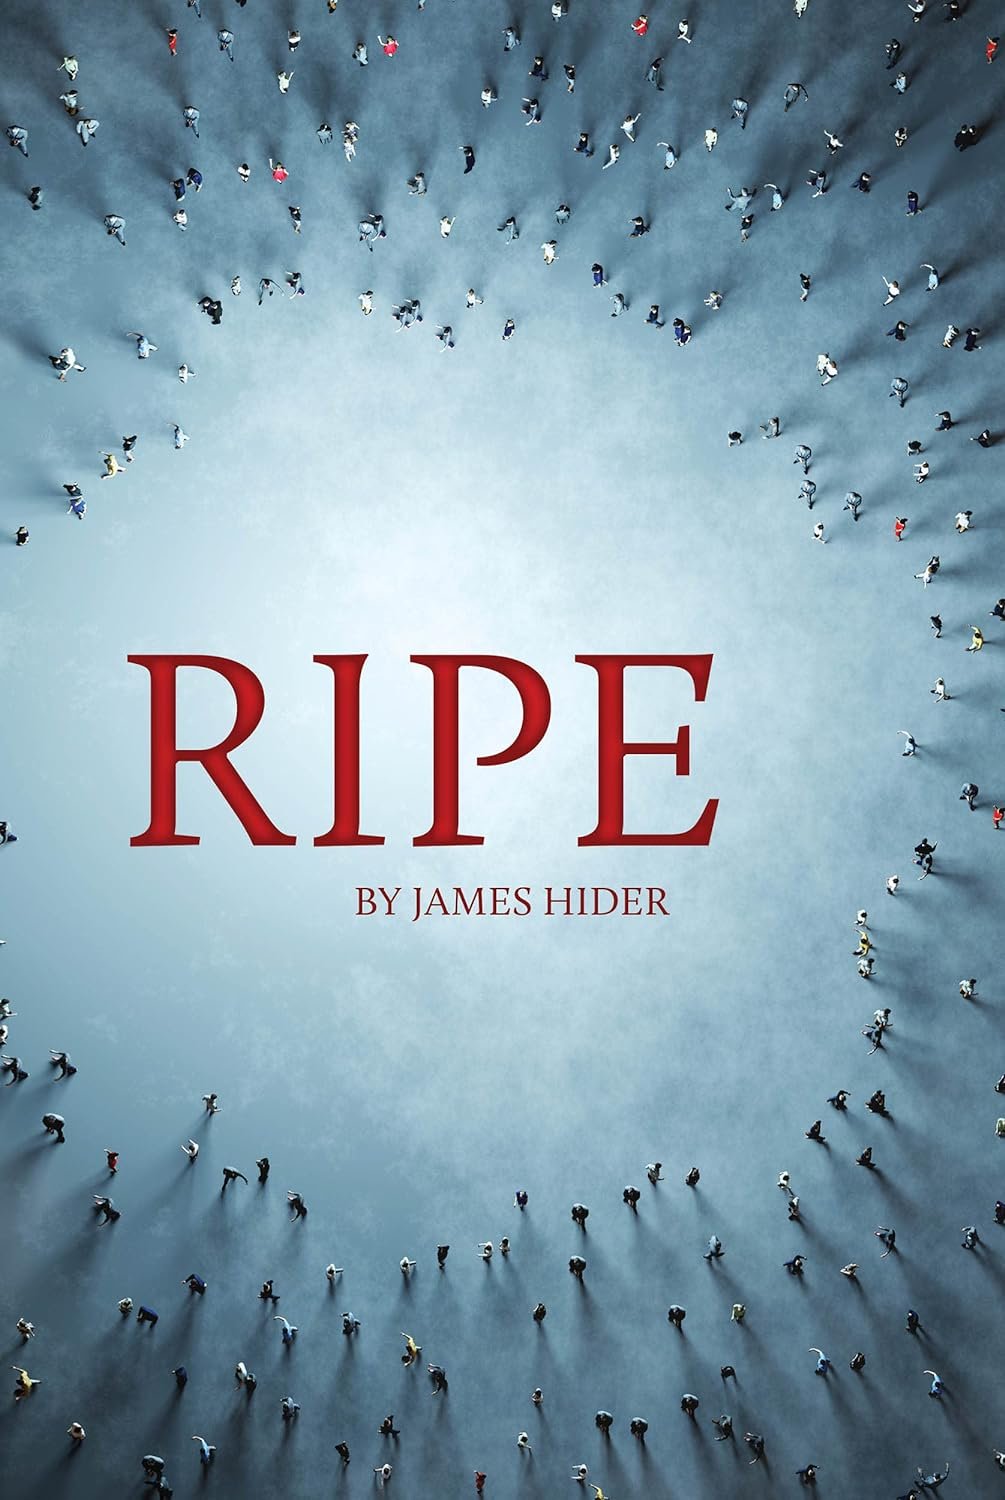 RIPE - Front Cover.jpg